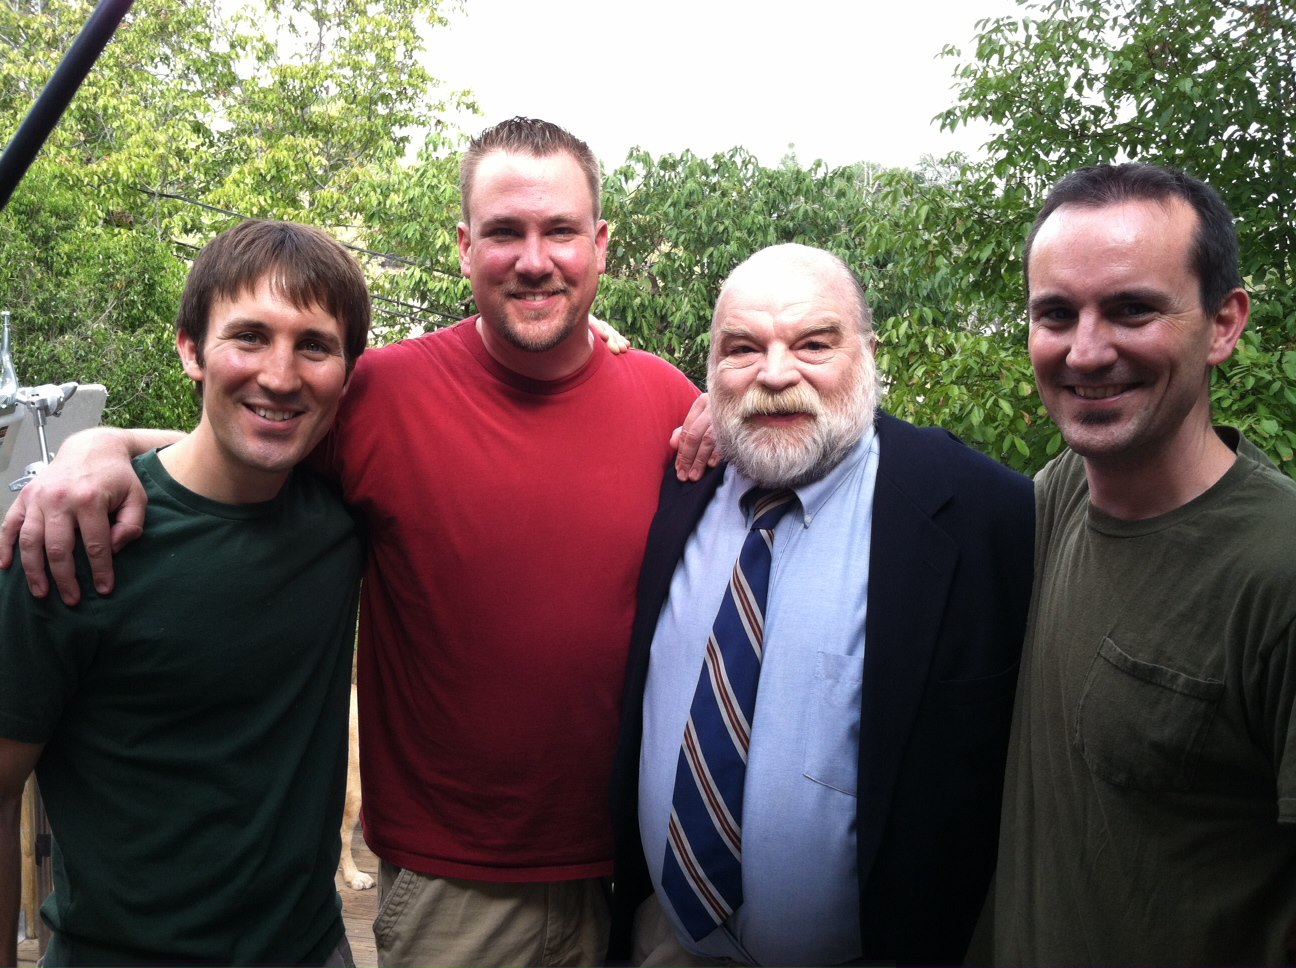 On the set of The Cabining, with Mike Kopera, Bo Keister, Richard Riehle, Steve Kopera